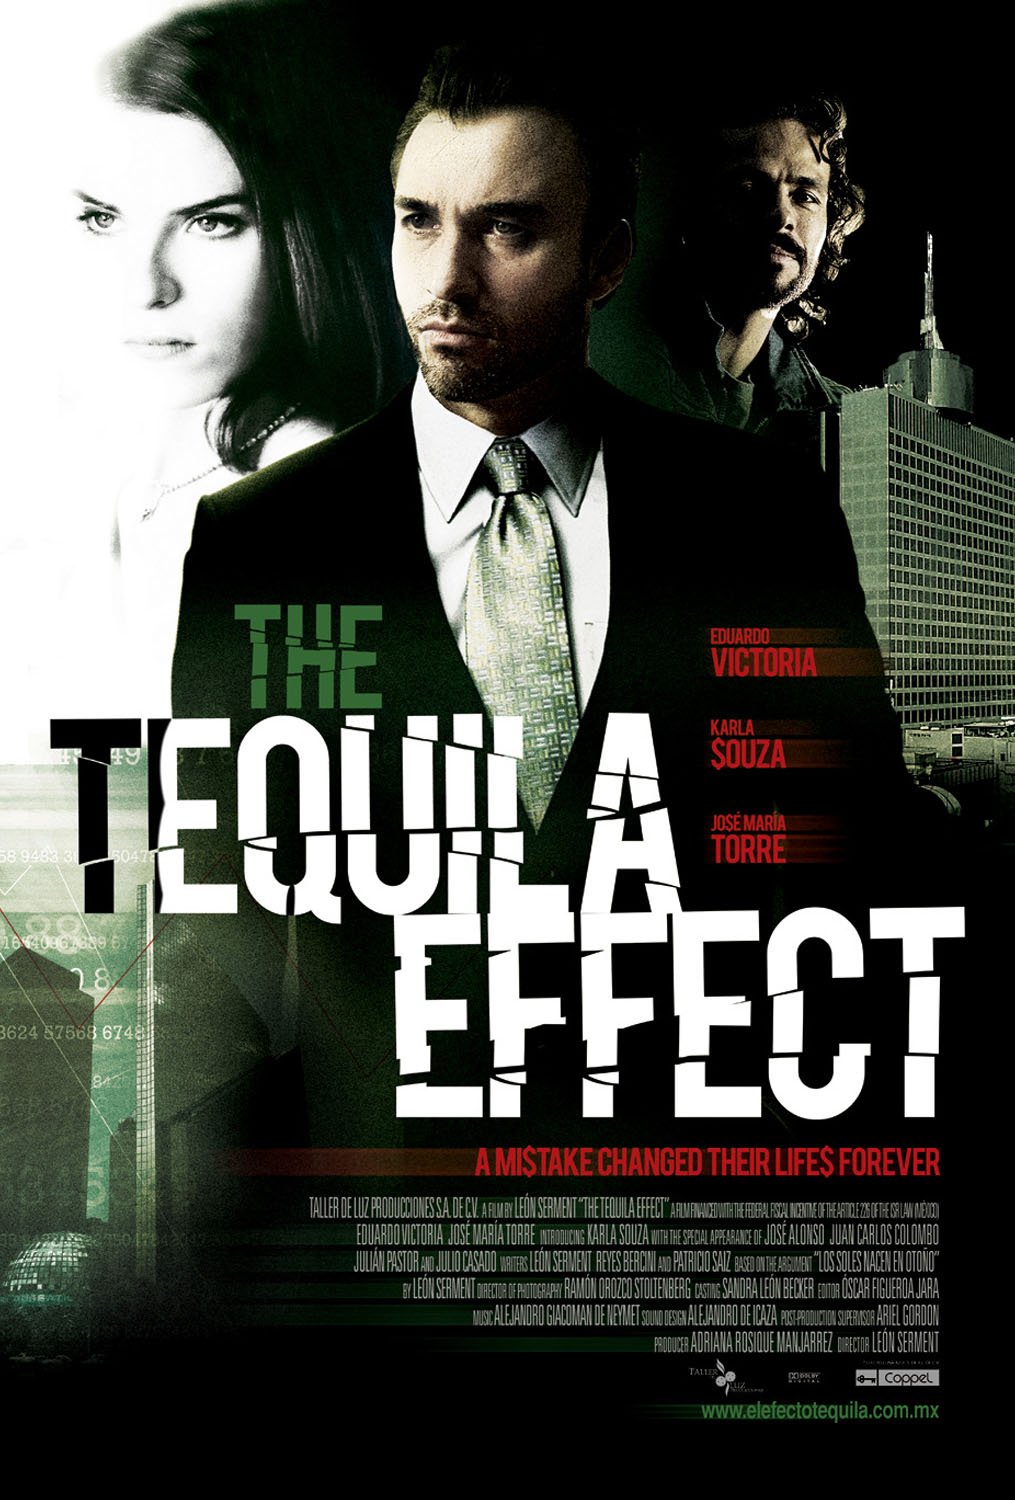 Extra Large Movie Poster Image for El efecto tequila (#2 of 2)